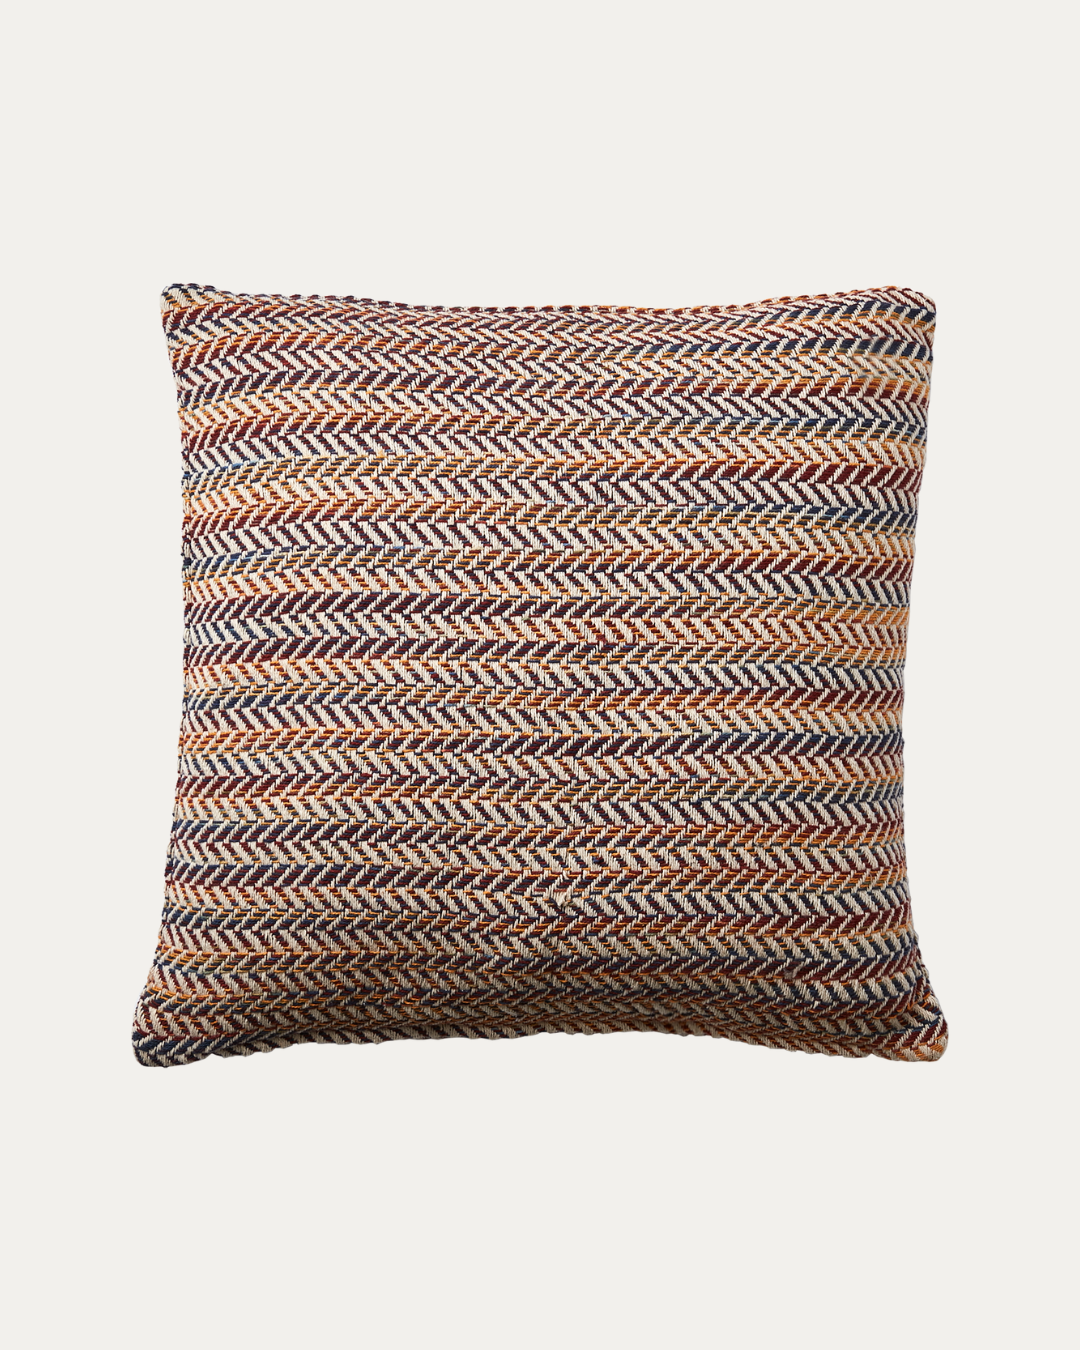 Athenas Cushion Cover, Red Tones